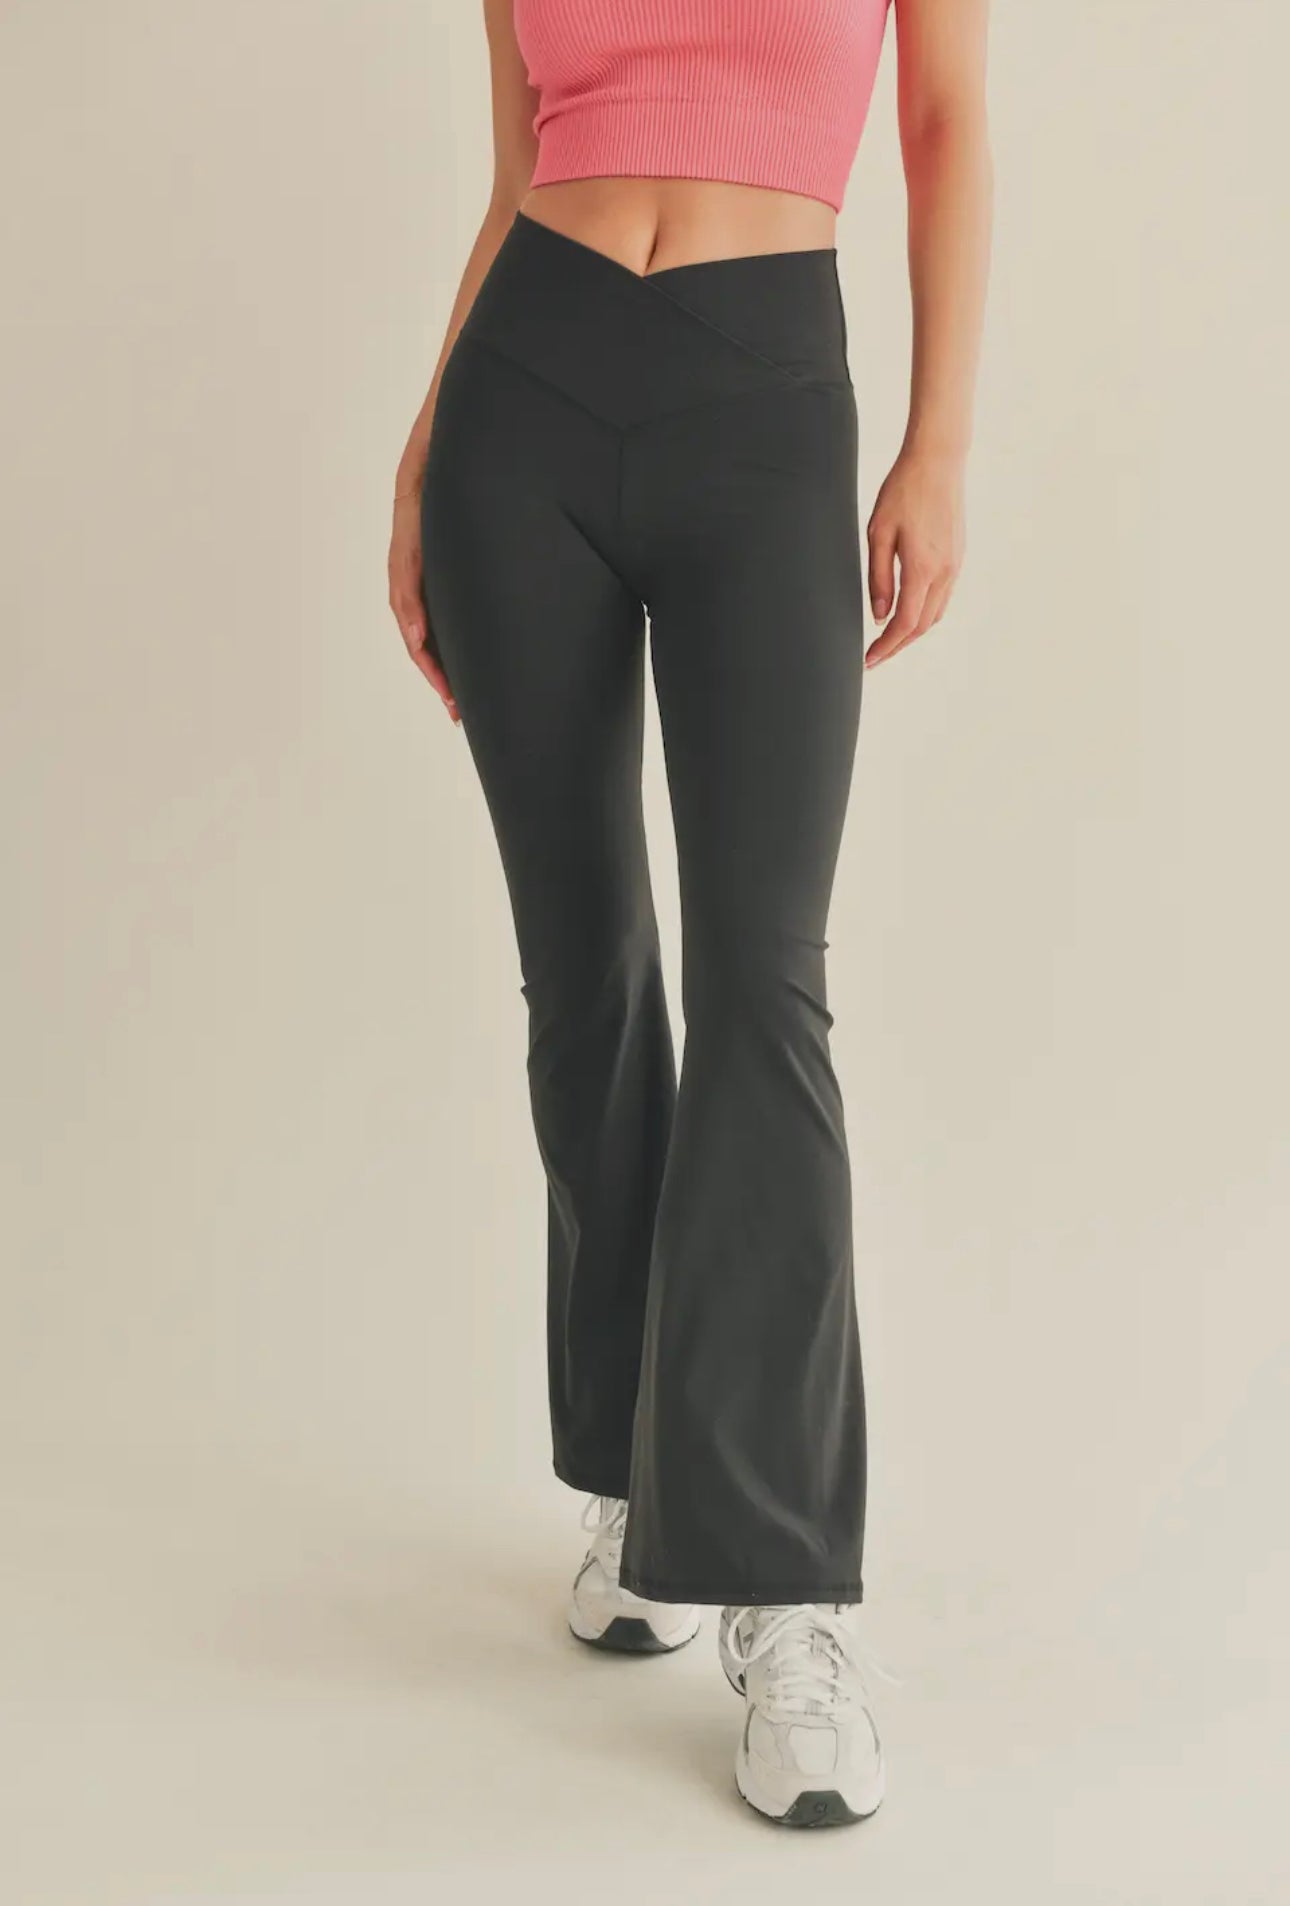 Crossover Flare Pants